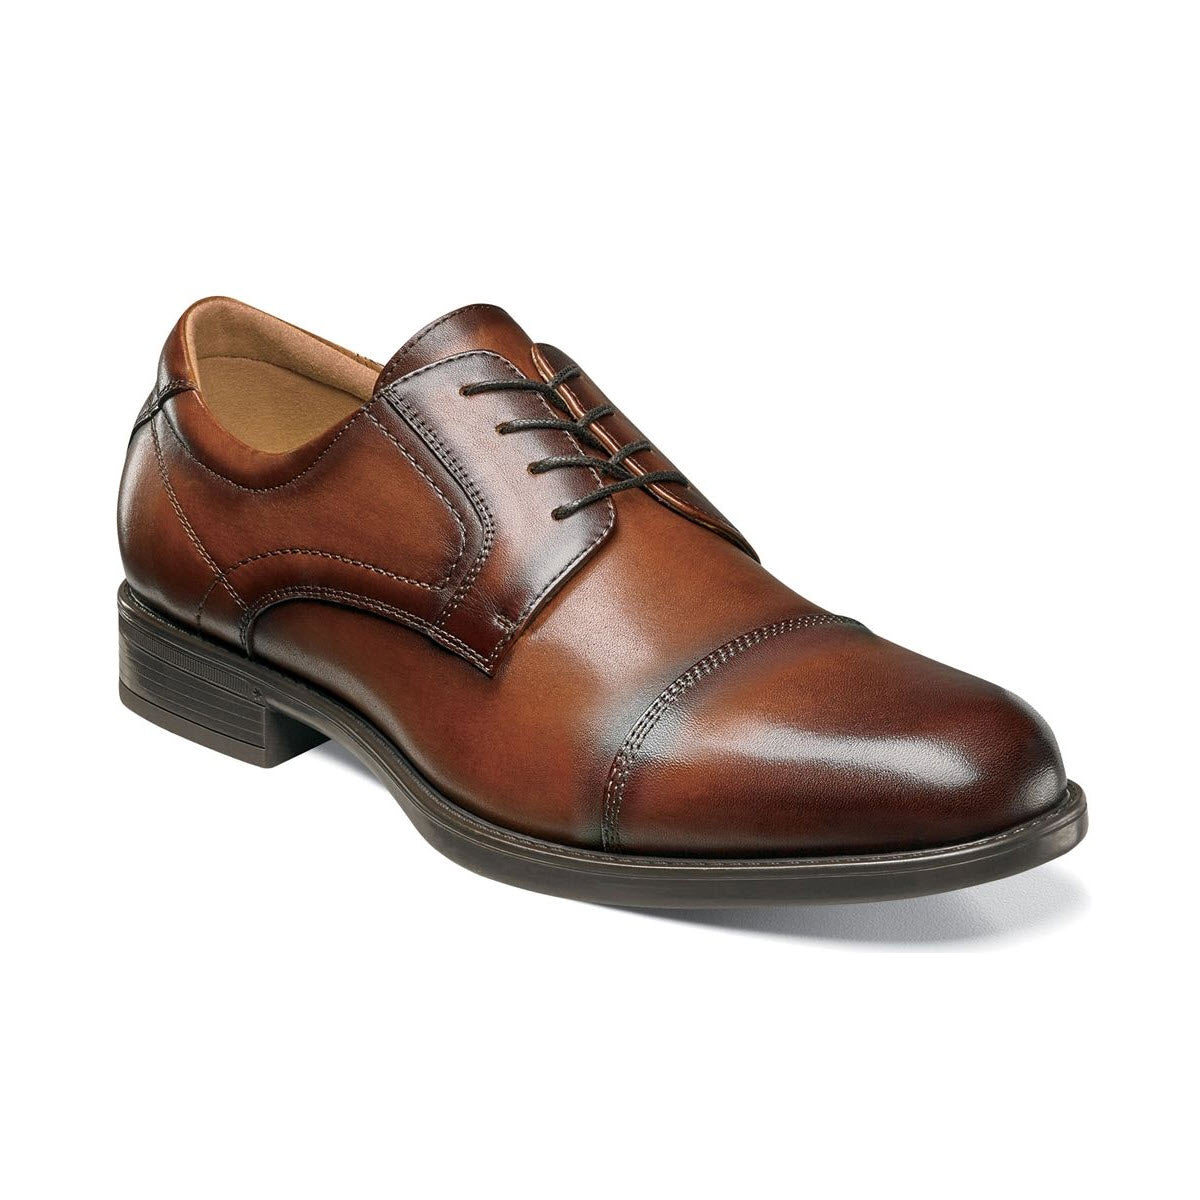 A polished brown leather dress shoe with laces, featuring detailed stitching and a low heel, known as the Florsheim Midtown Cap Toe Oxford.